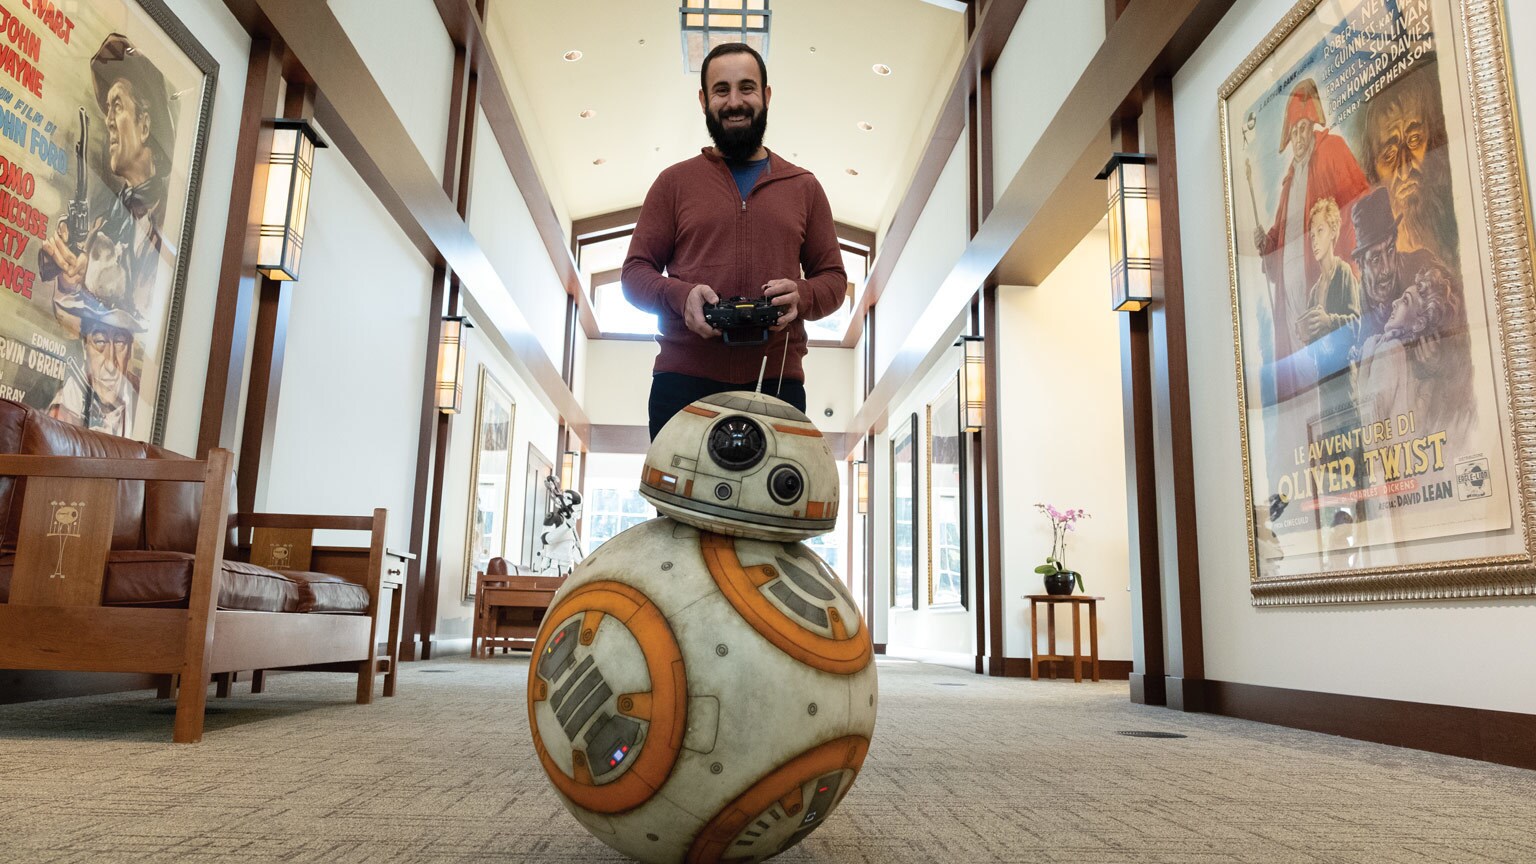 Before You Learn Their Stories in One Day at Disney, Meet Lucasfilm’s Este Meza and Billy Ray Chubbs